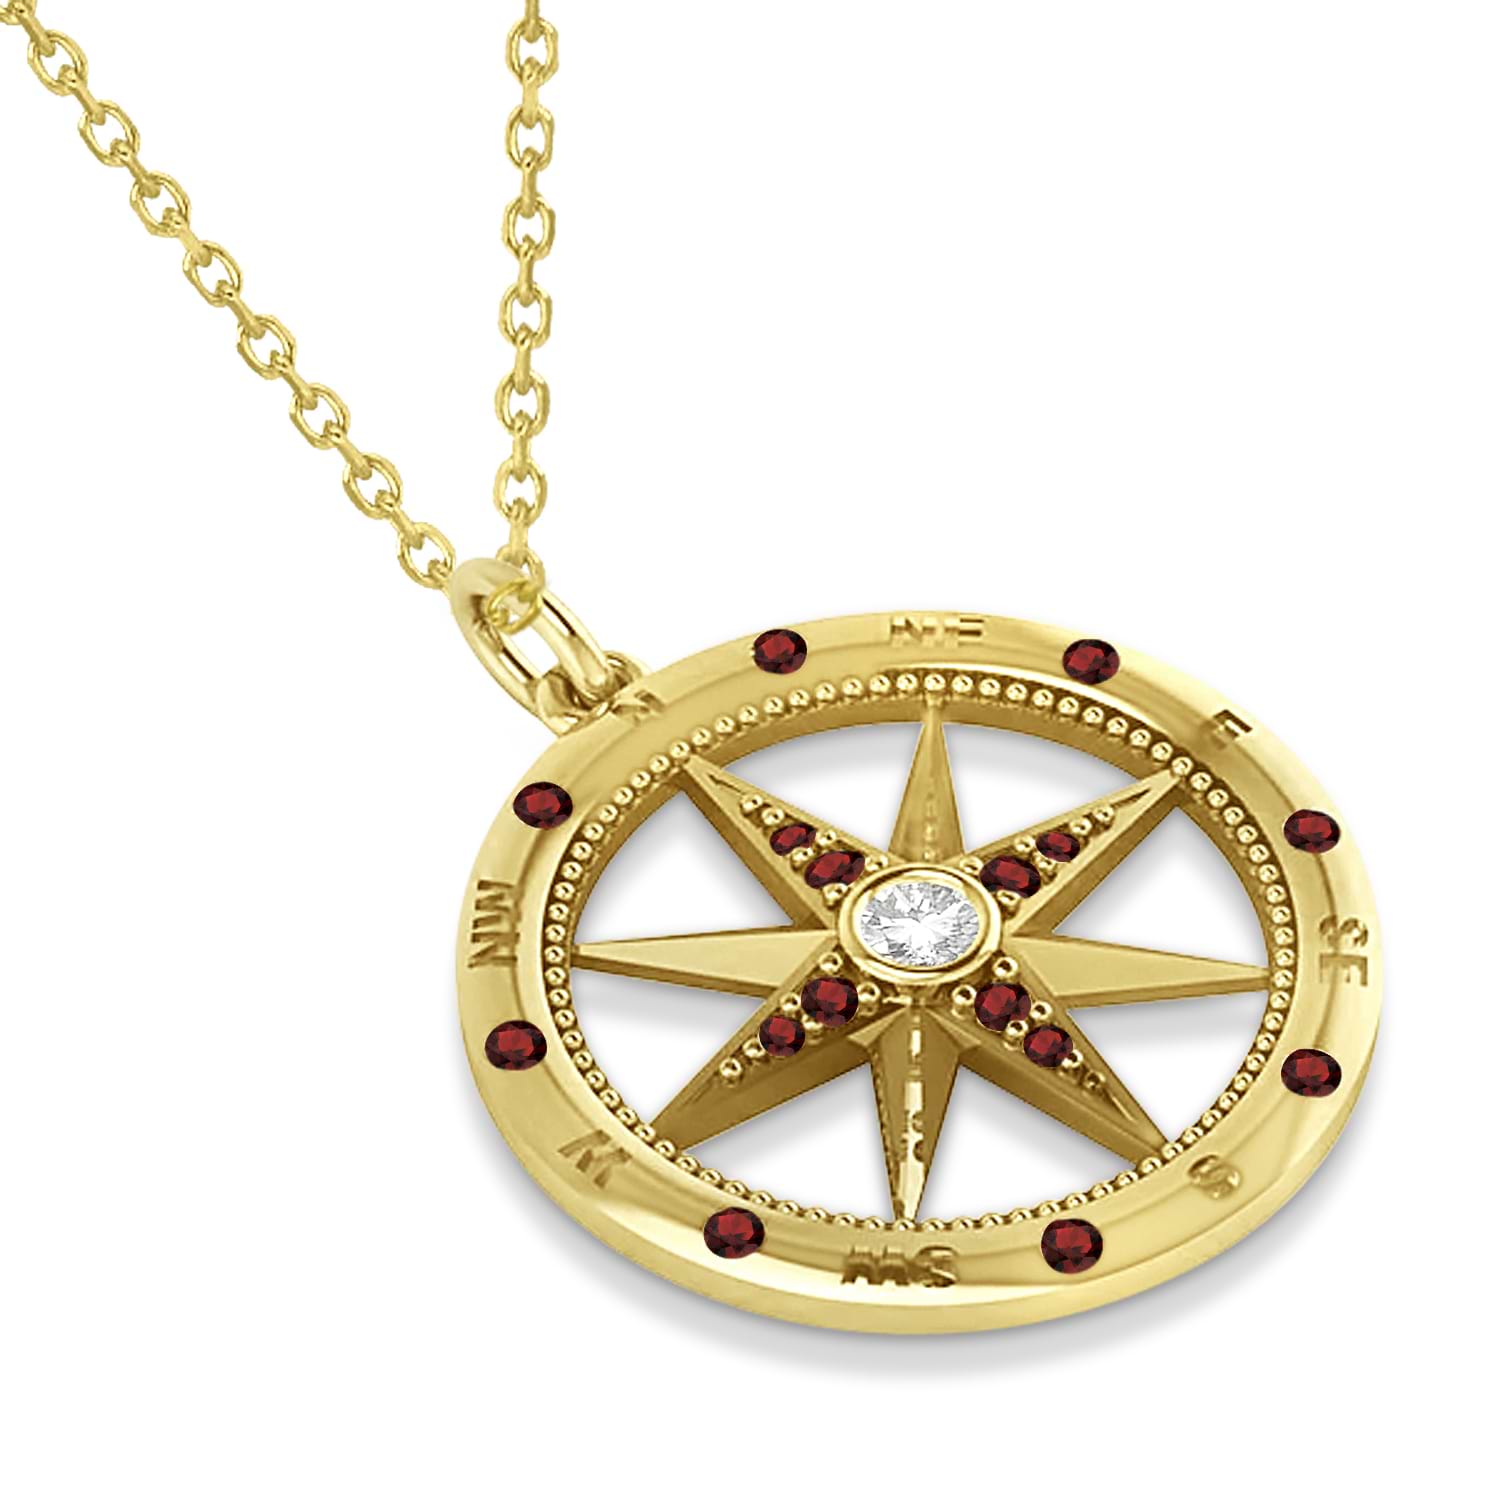 Extra Large Compass Pendant For Men Garnet & Diamond Accented 14k Yellow Gold (0.45ct)